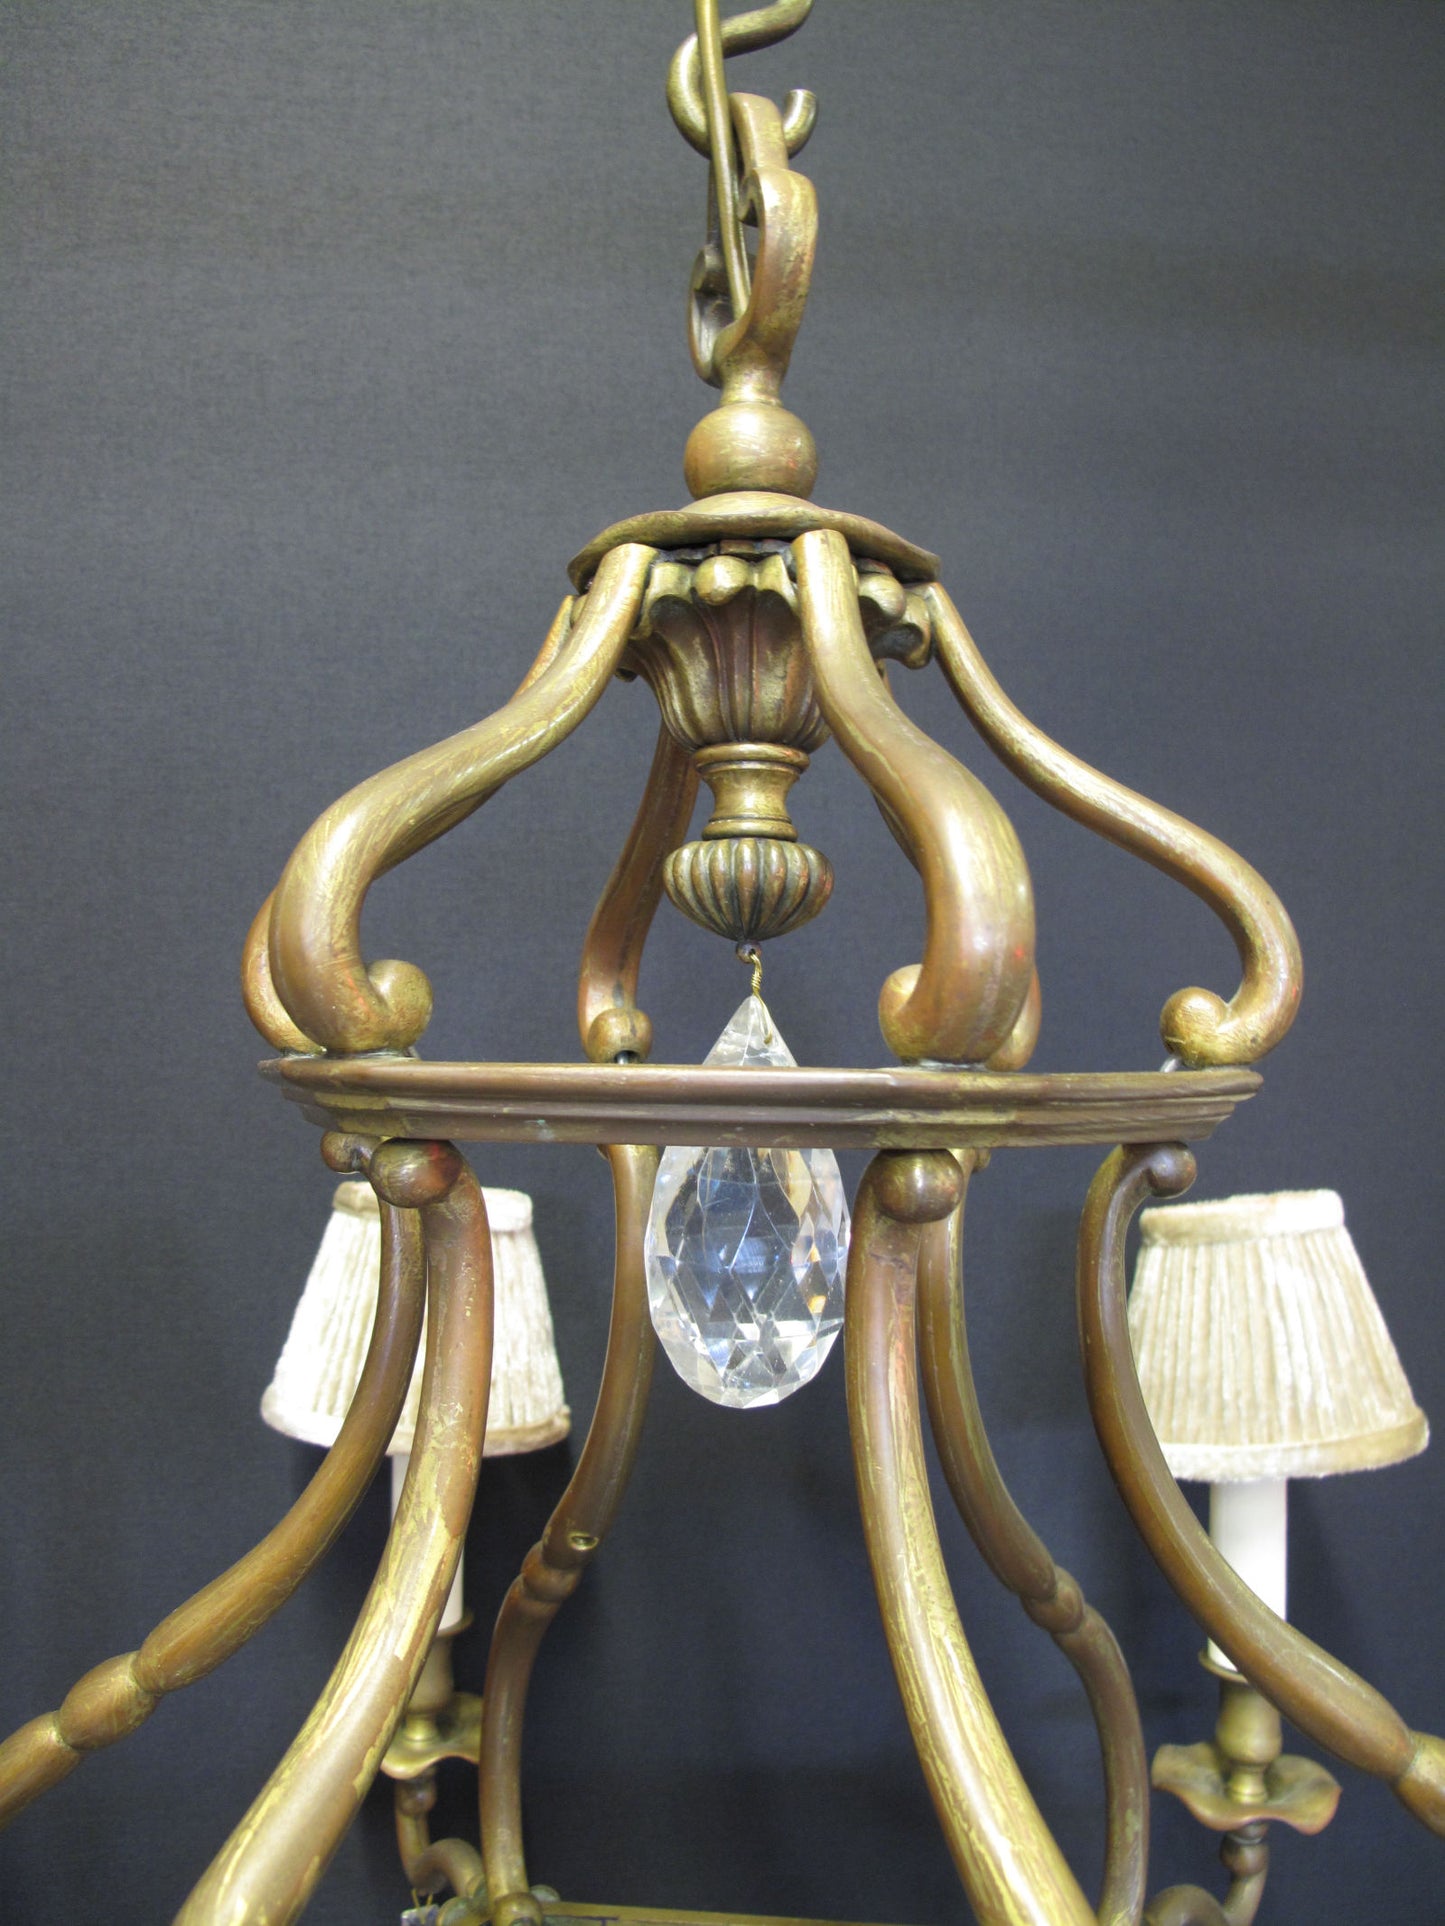 close up view of chandelier top